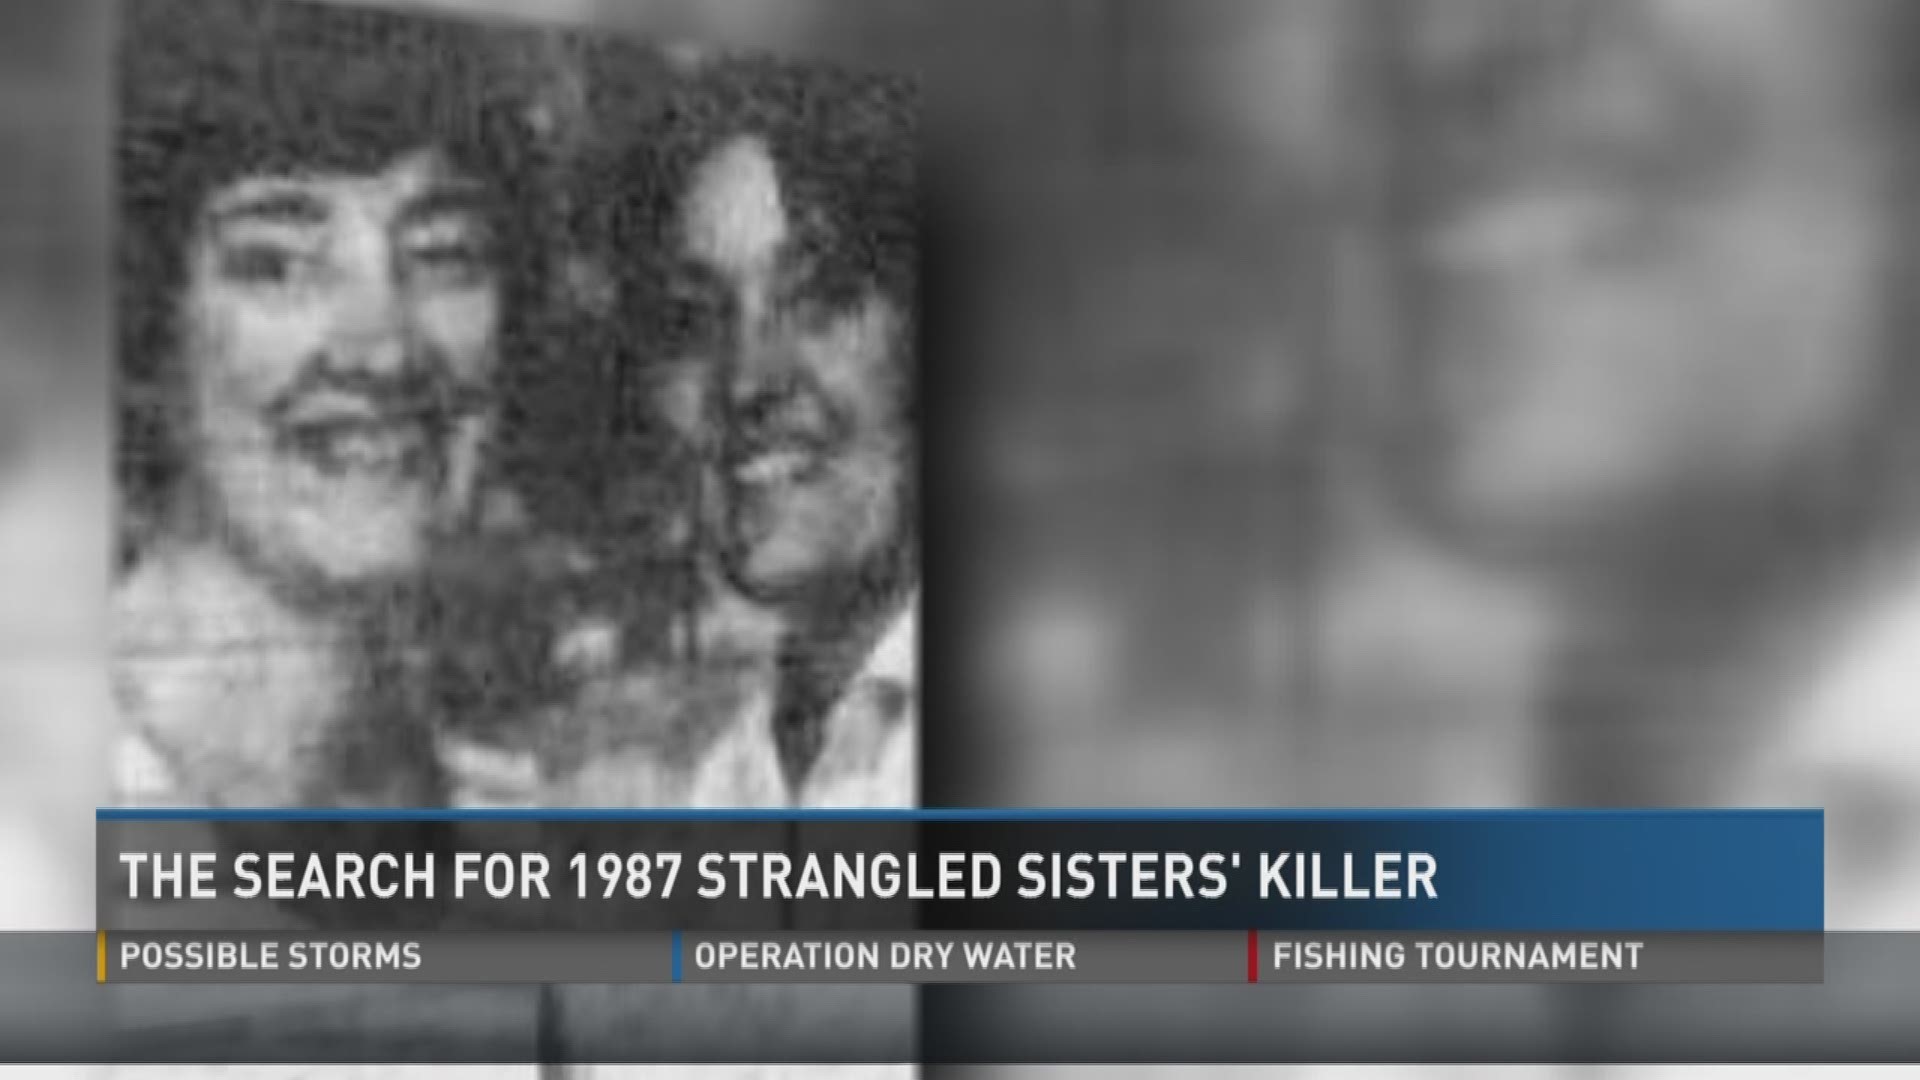 June 30, 2017: After 30 years of searching, detectives don't know who killed the Williams sisters.